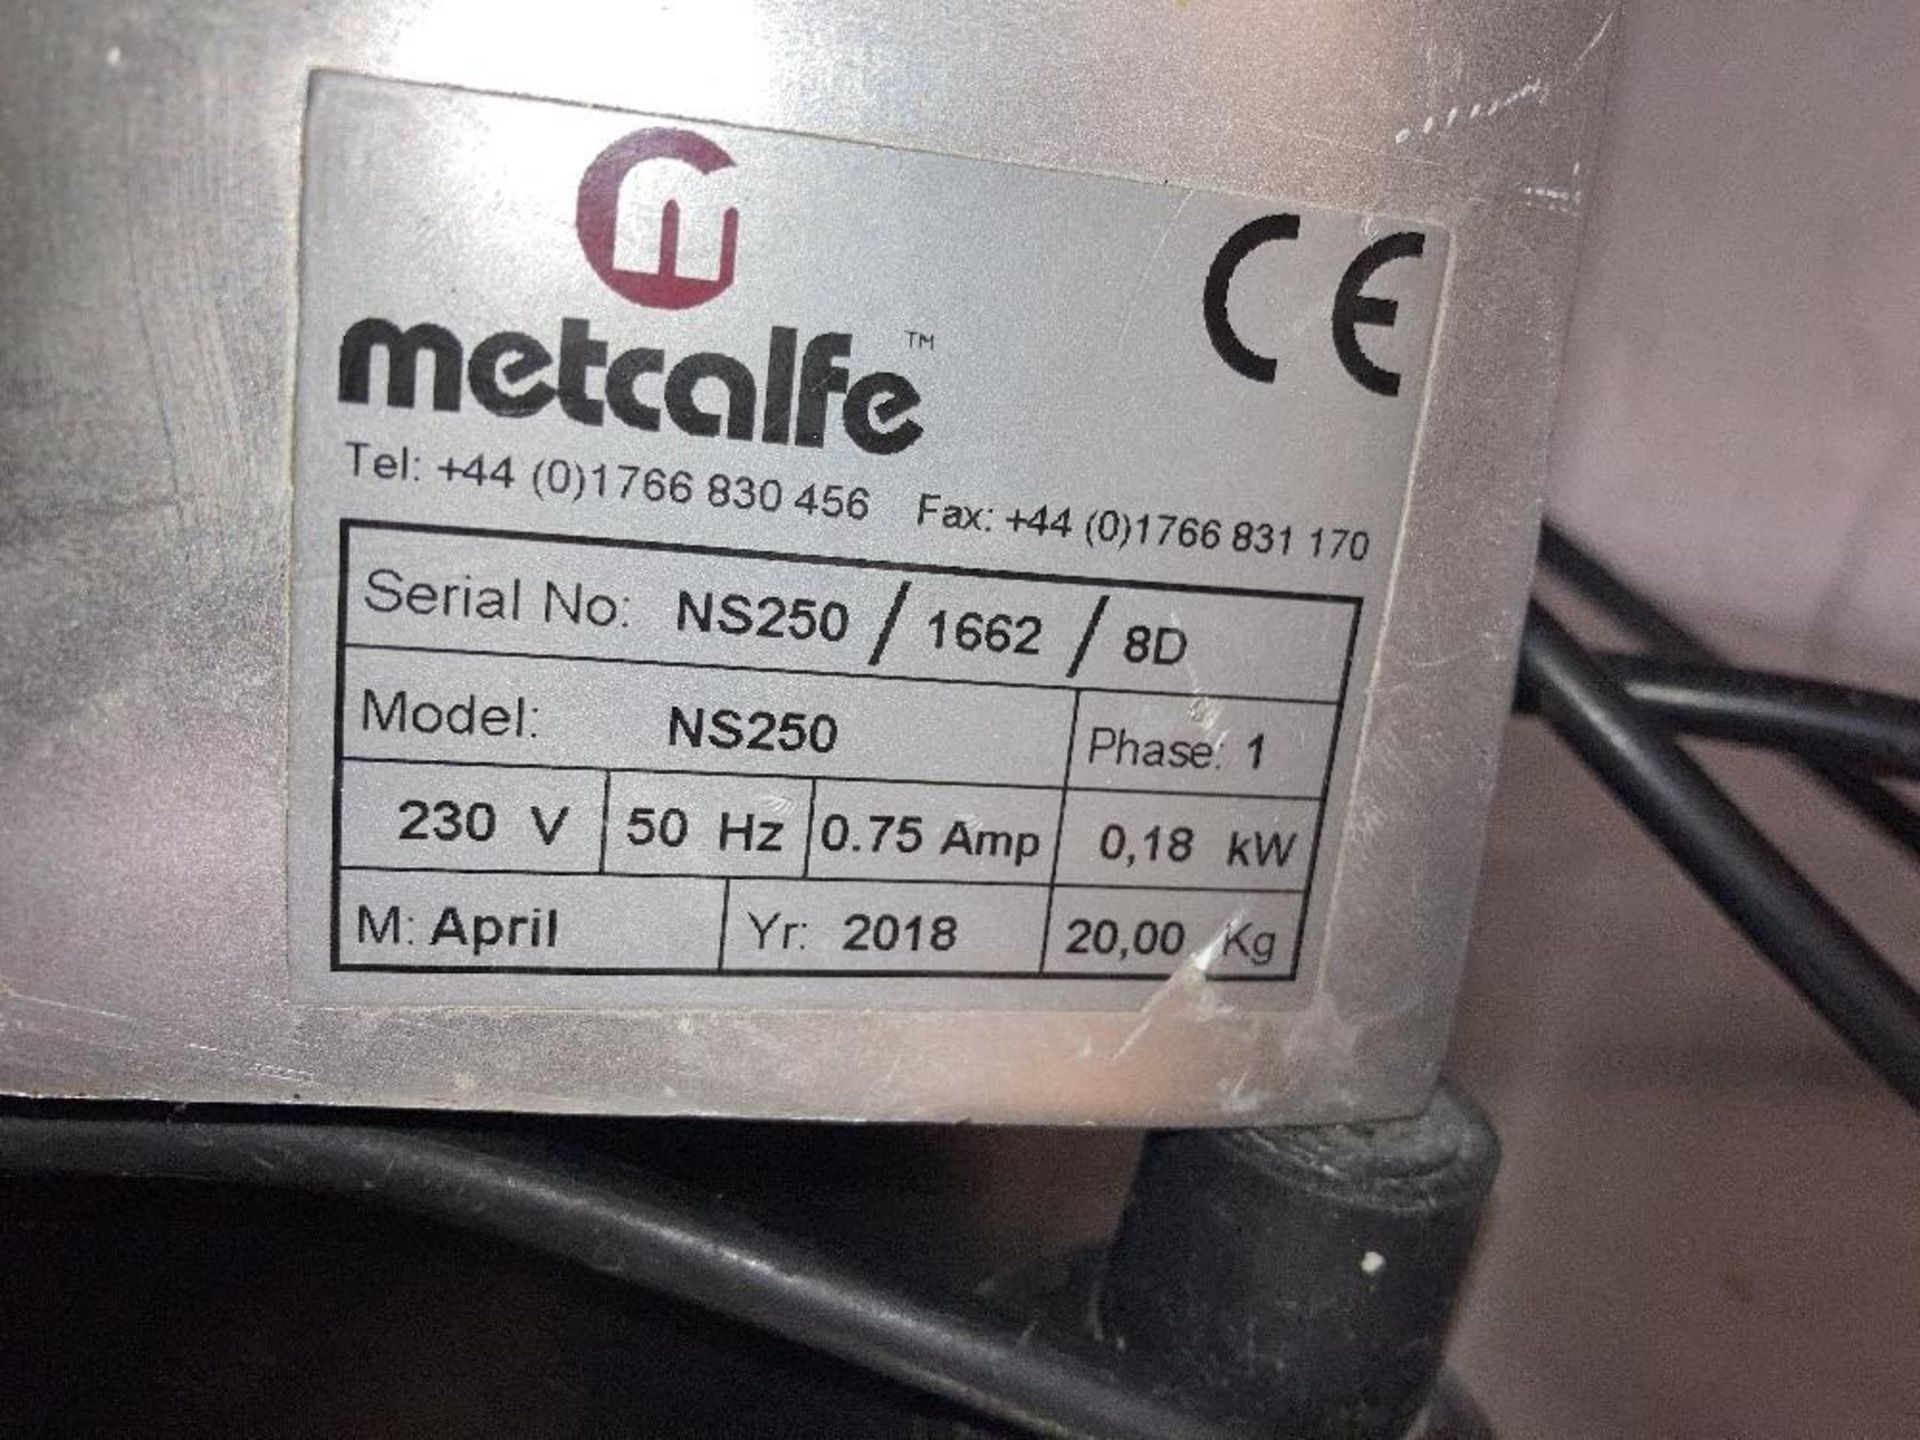 Metcalfe NS250 Commercial Meat Slicer (DOM: 2018) - Image 7 of 8